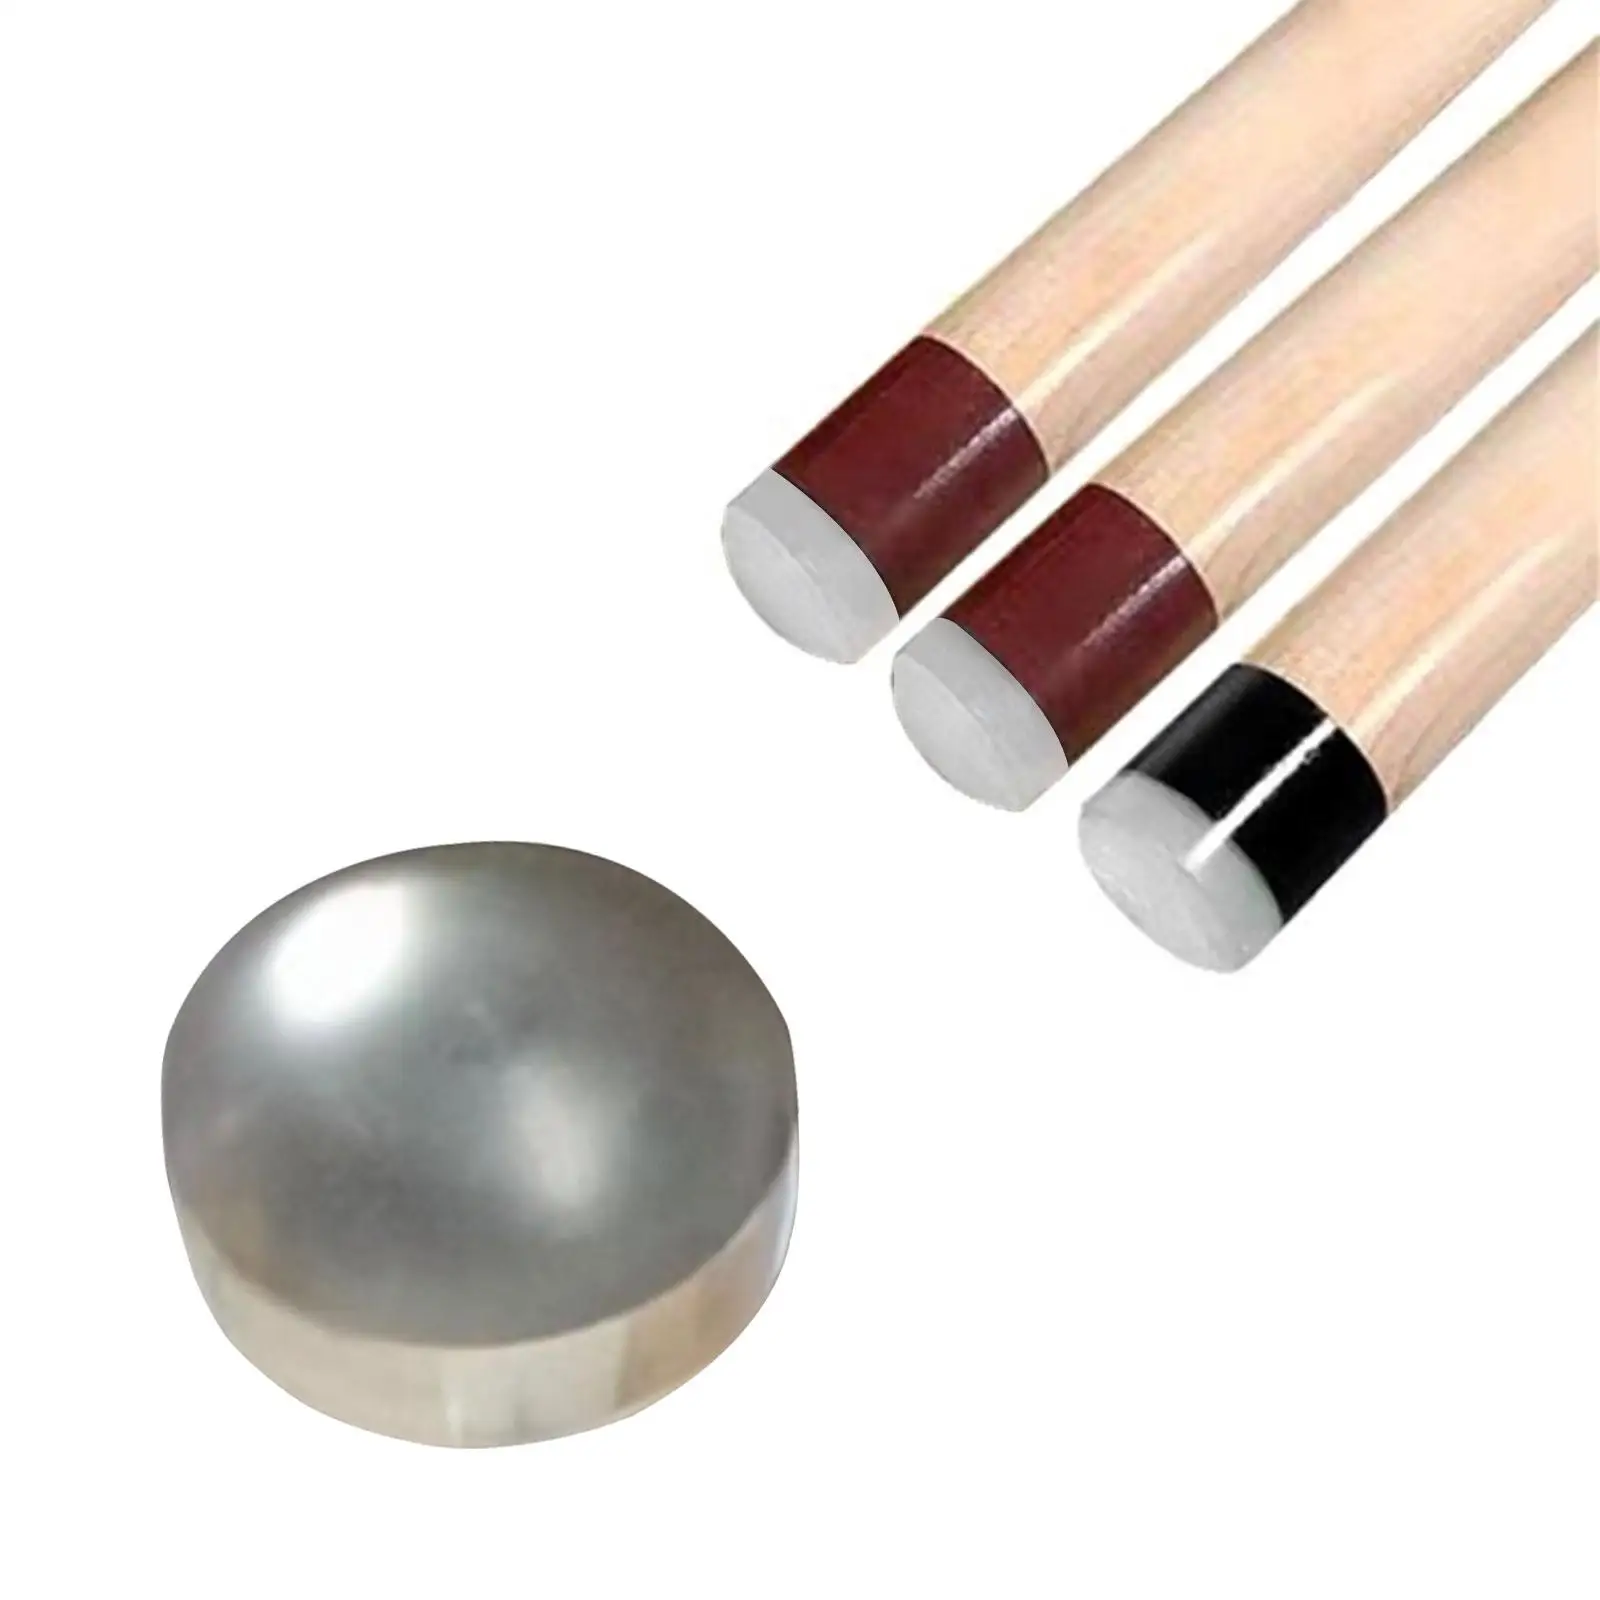 Billiard Pool Cue Tip 13mm Strong Hardness Cue Accessory Billiards Cue Tip for Game Snooker Indoor Pool Cues Billiards Players